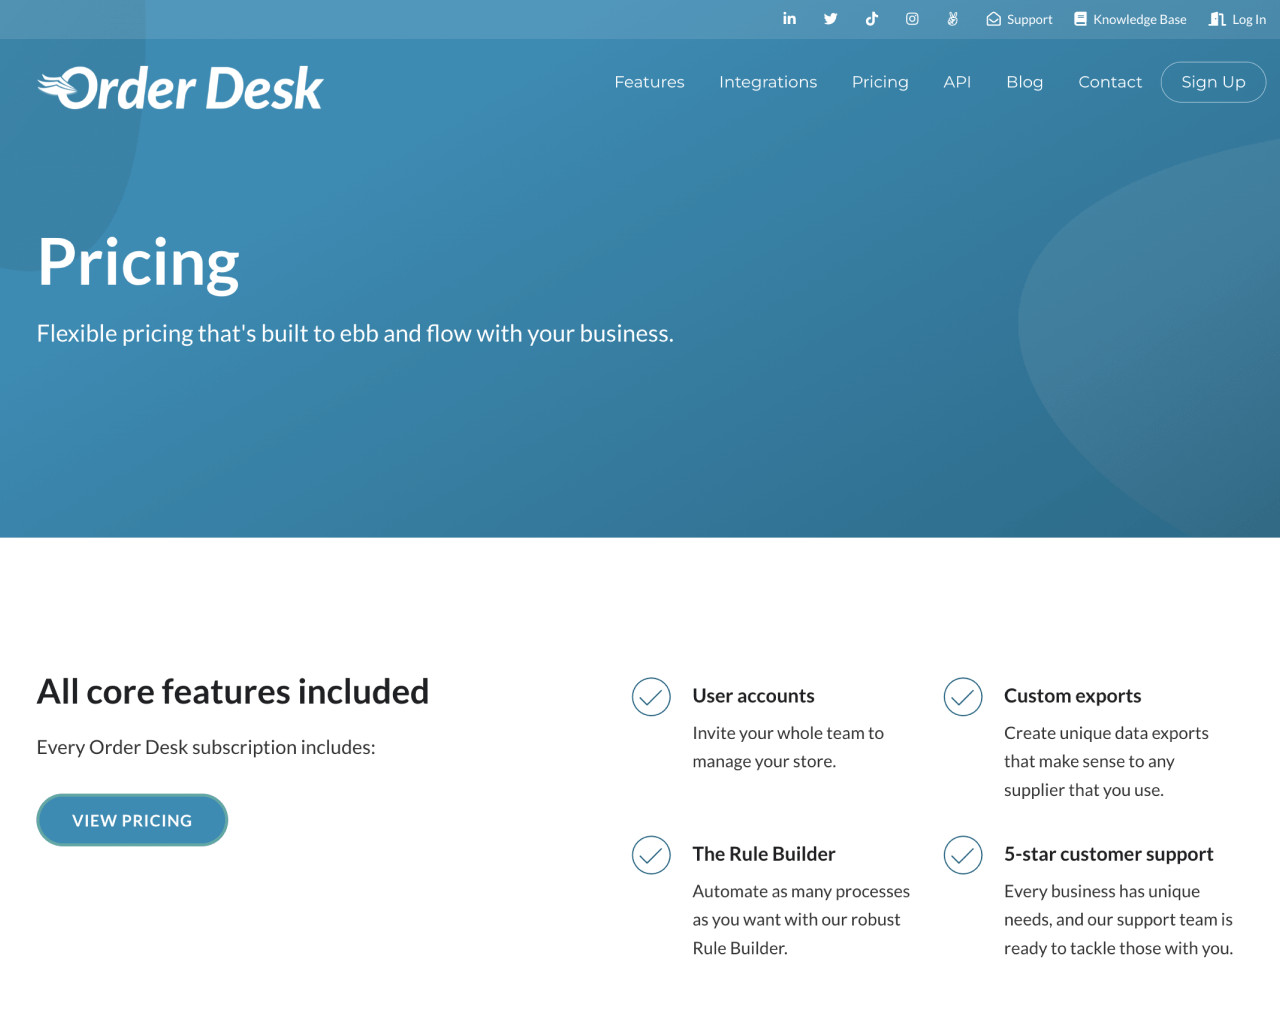 A screenshot of the Order Desk pricing page